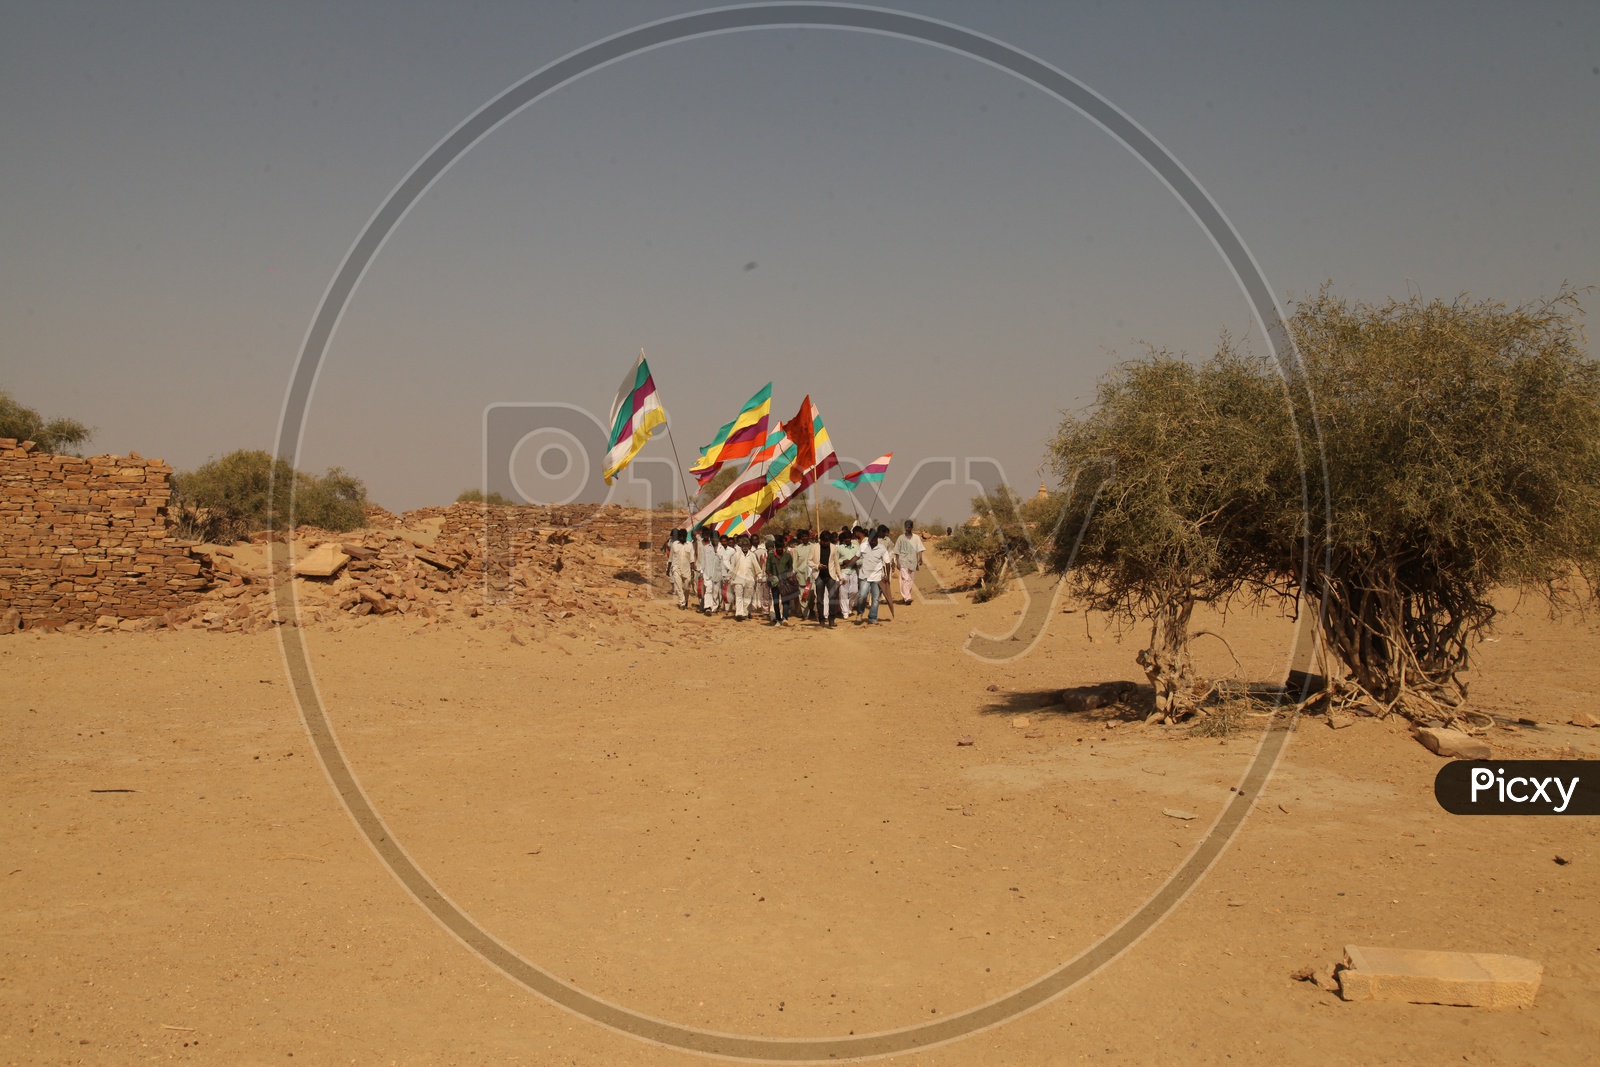 Agitation by men in the desert with flags